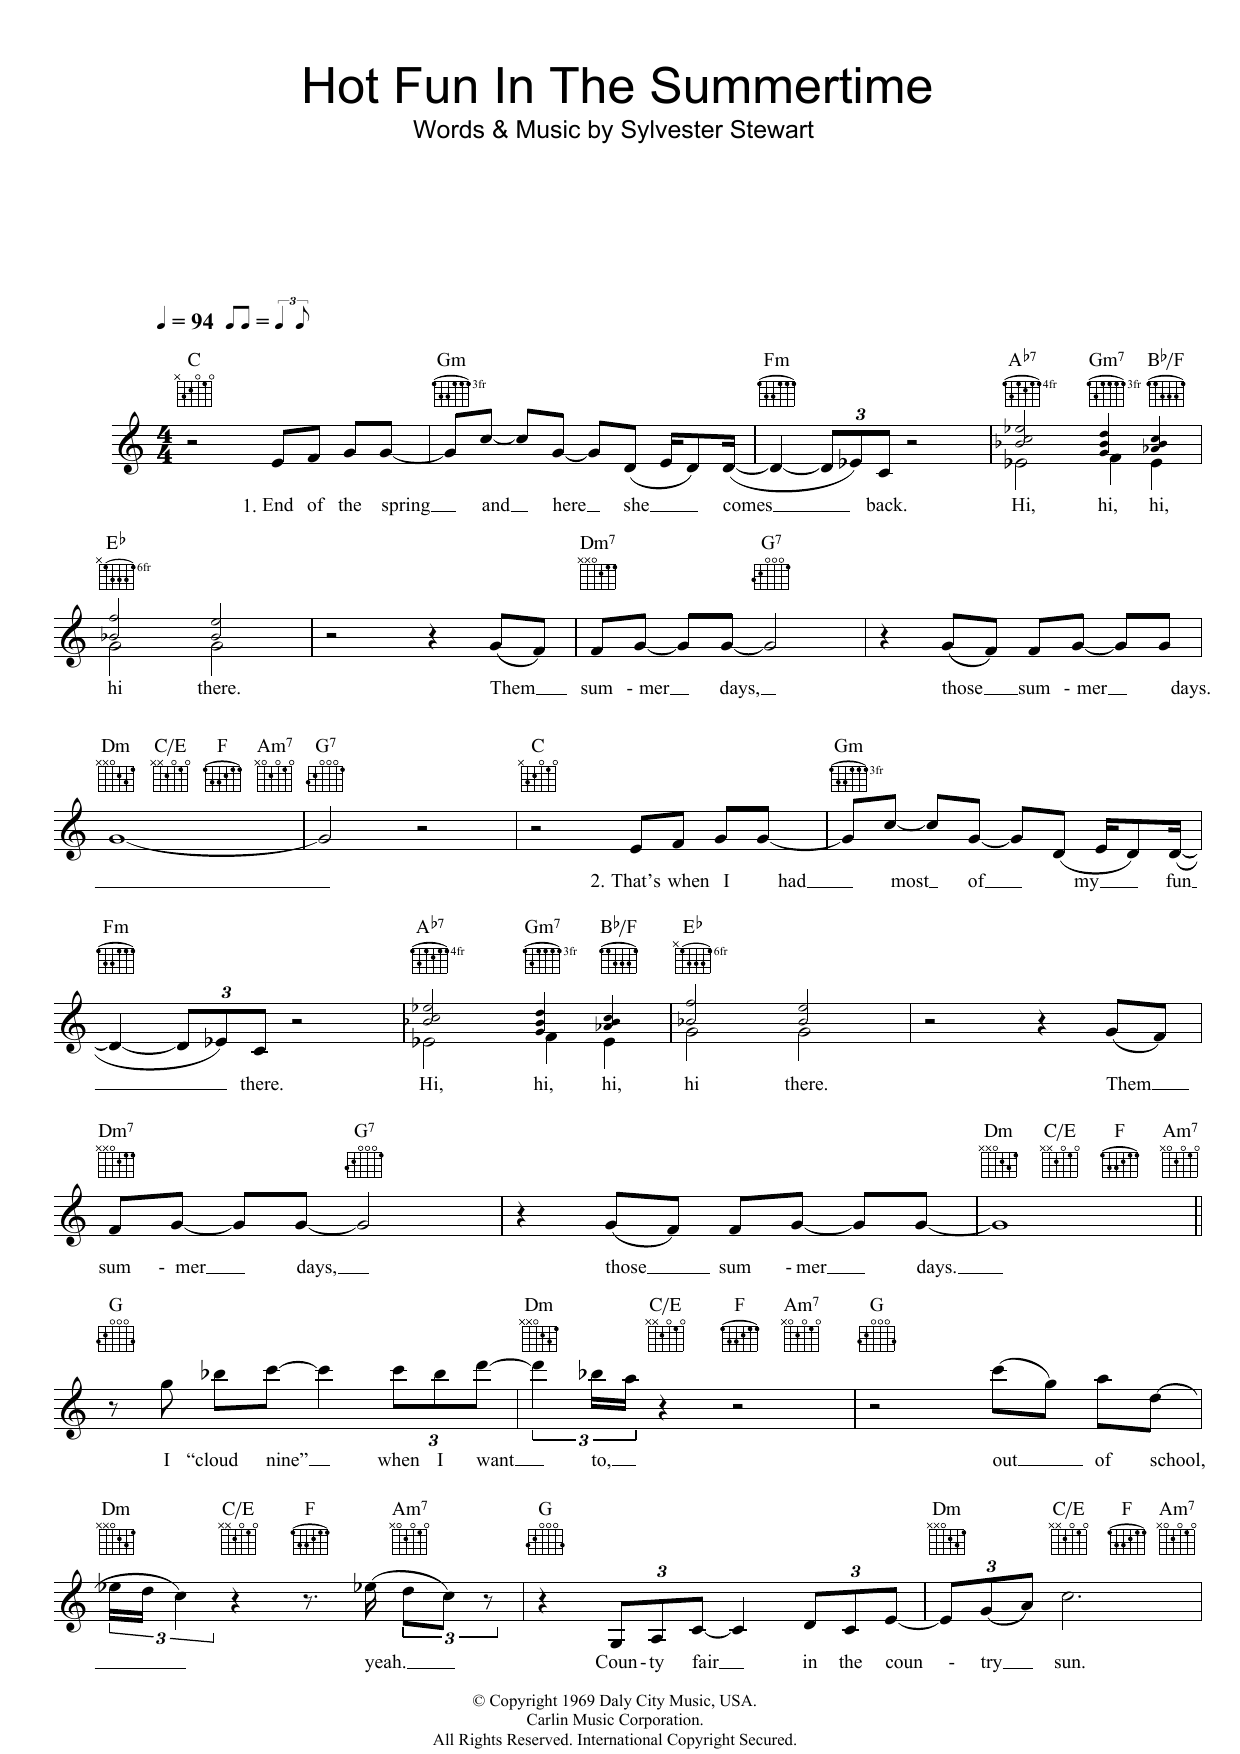 Download Sly & The Family Stone Hot Fun In The Summertime Sheet Music